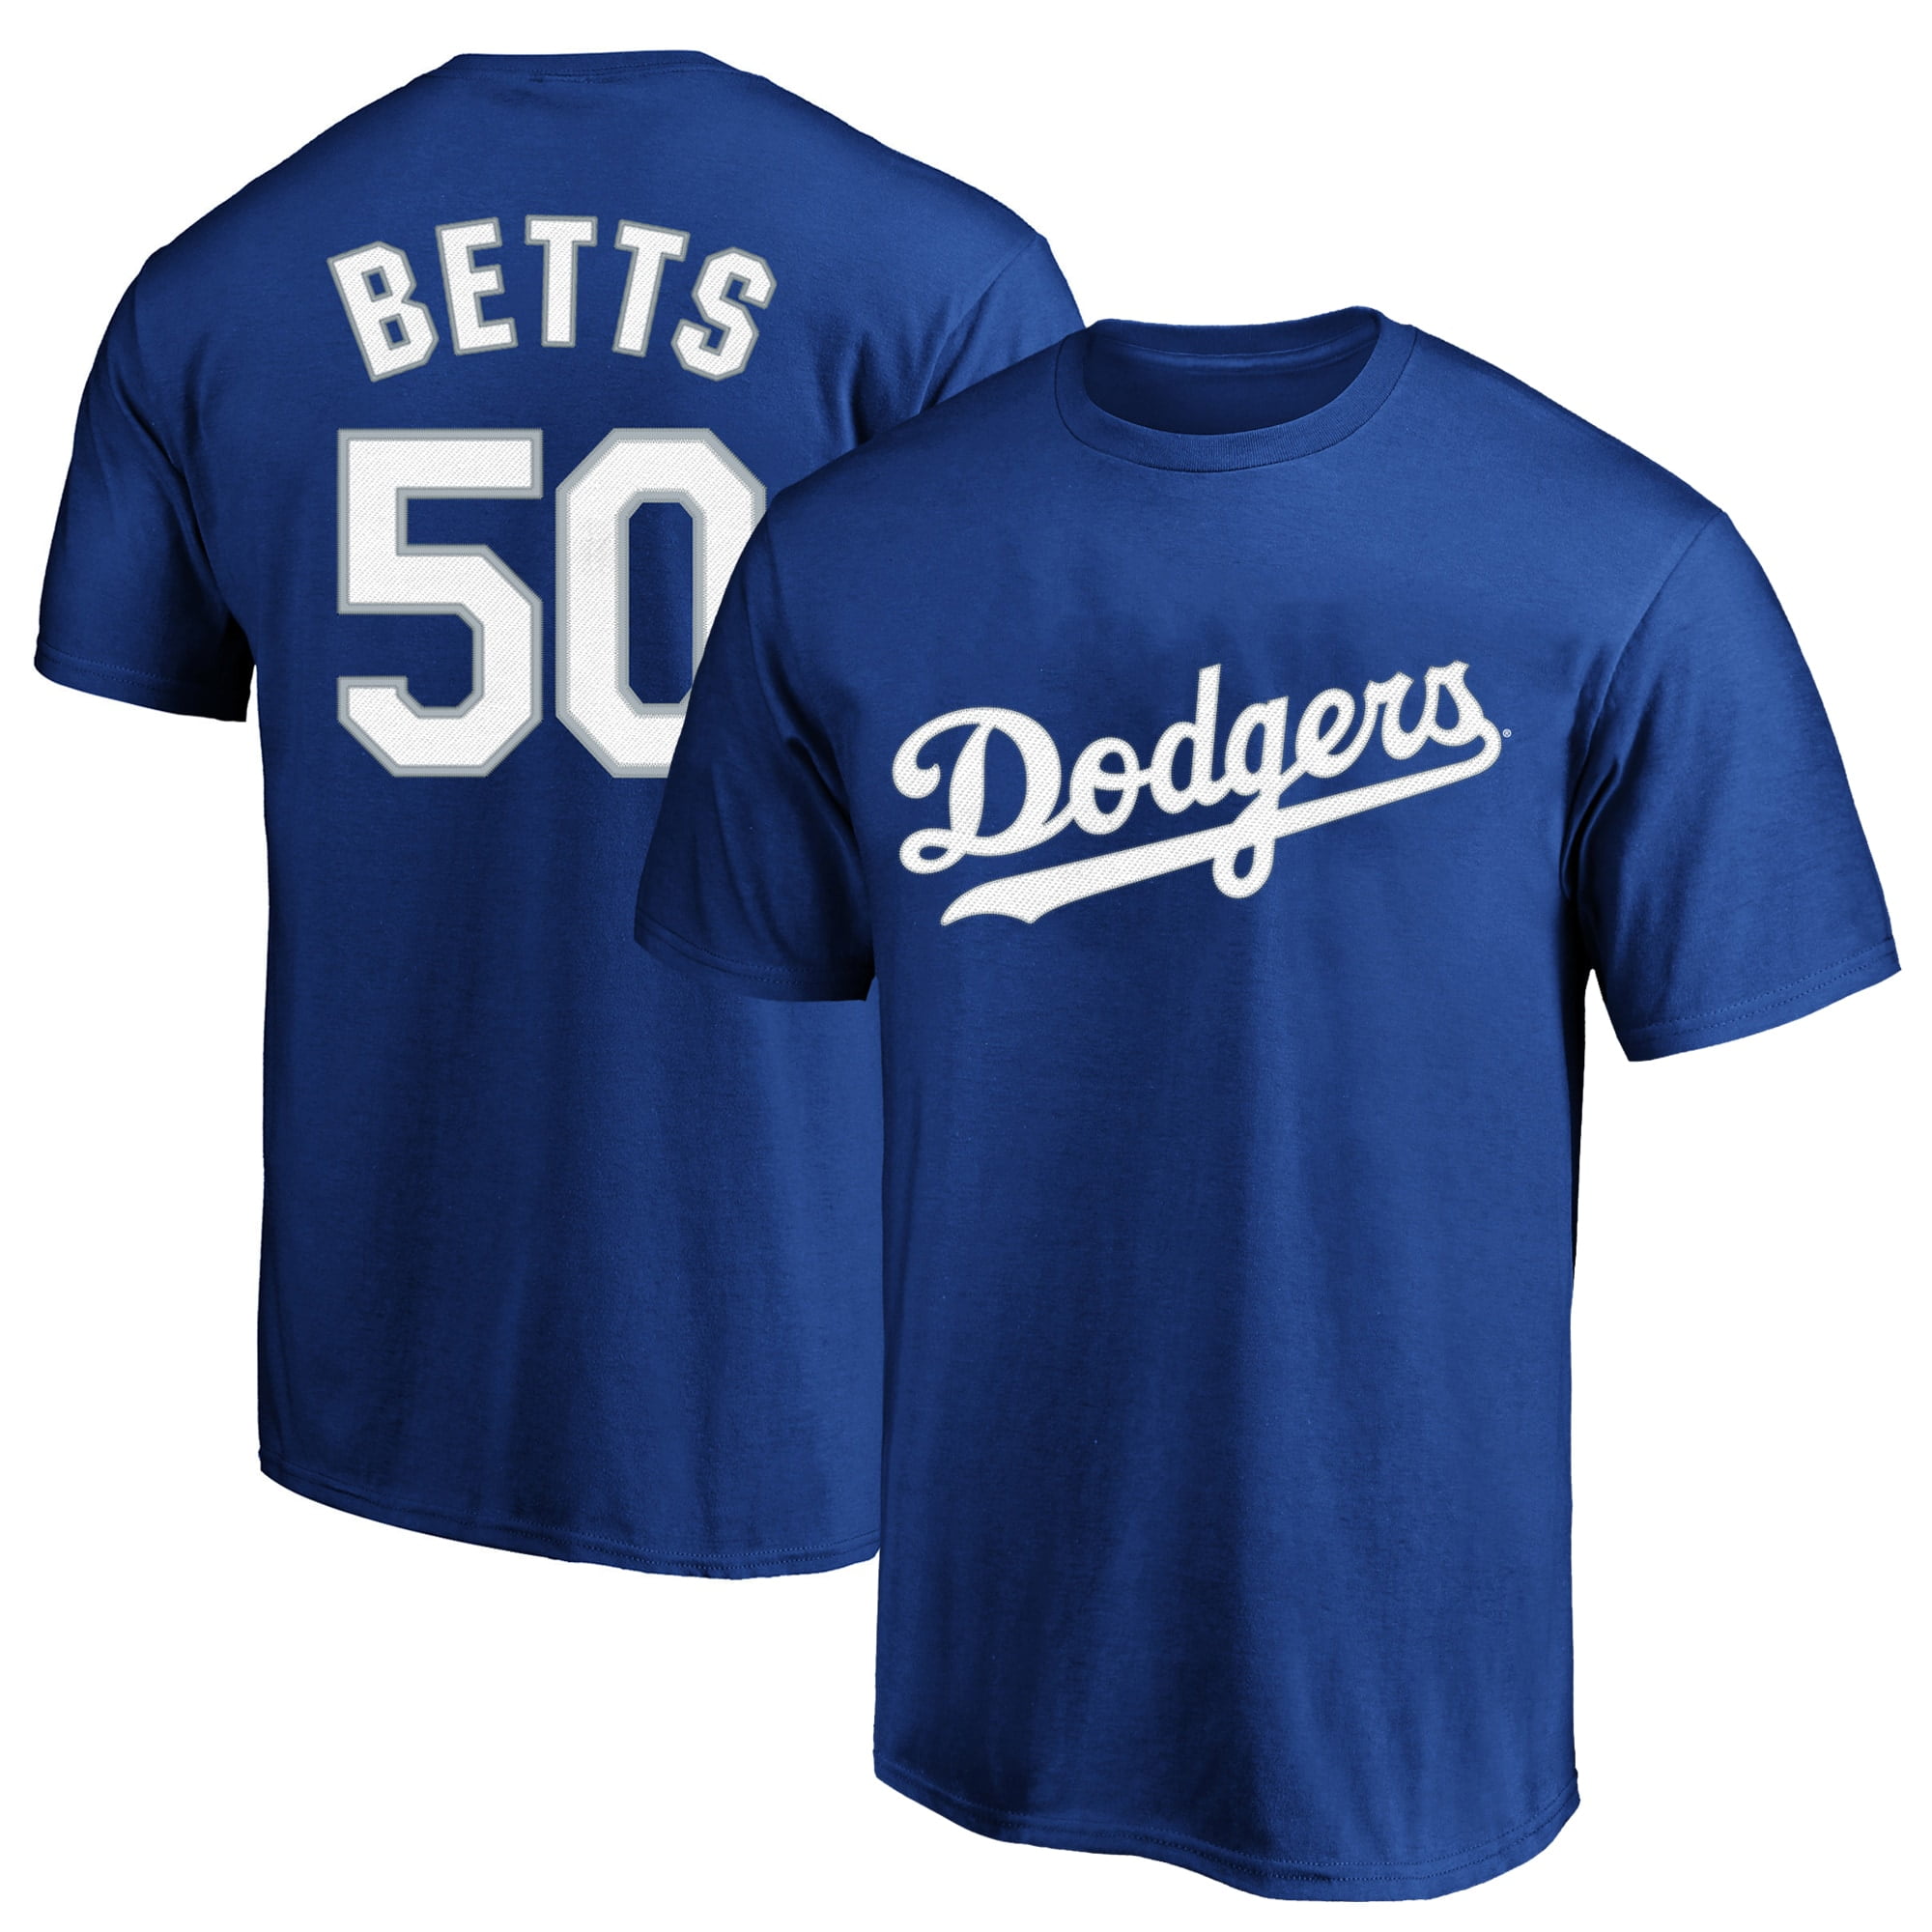 Majestic Men's Mookie Betts Royal Los Angeles Dodgers Big and Tall Replica  Player Jersey - Macy's